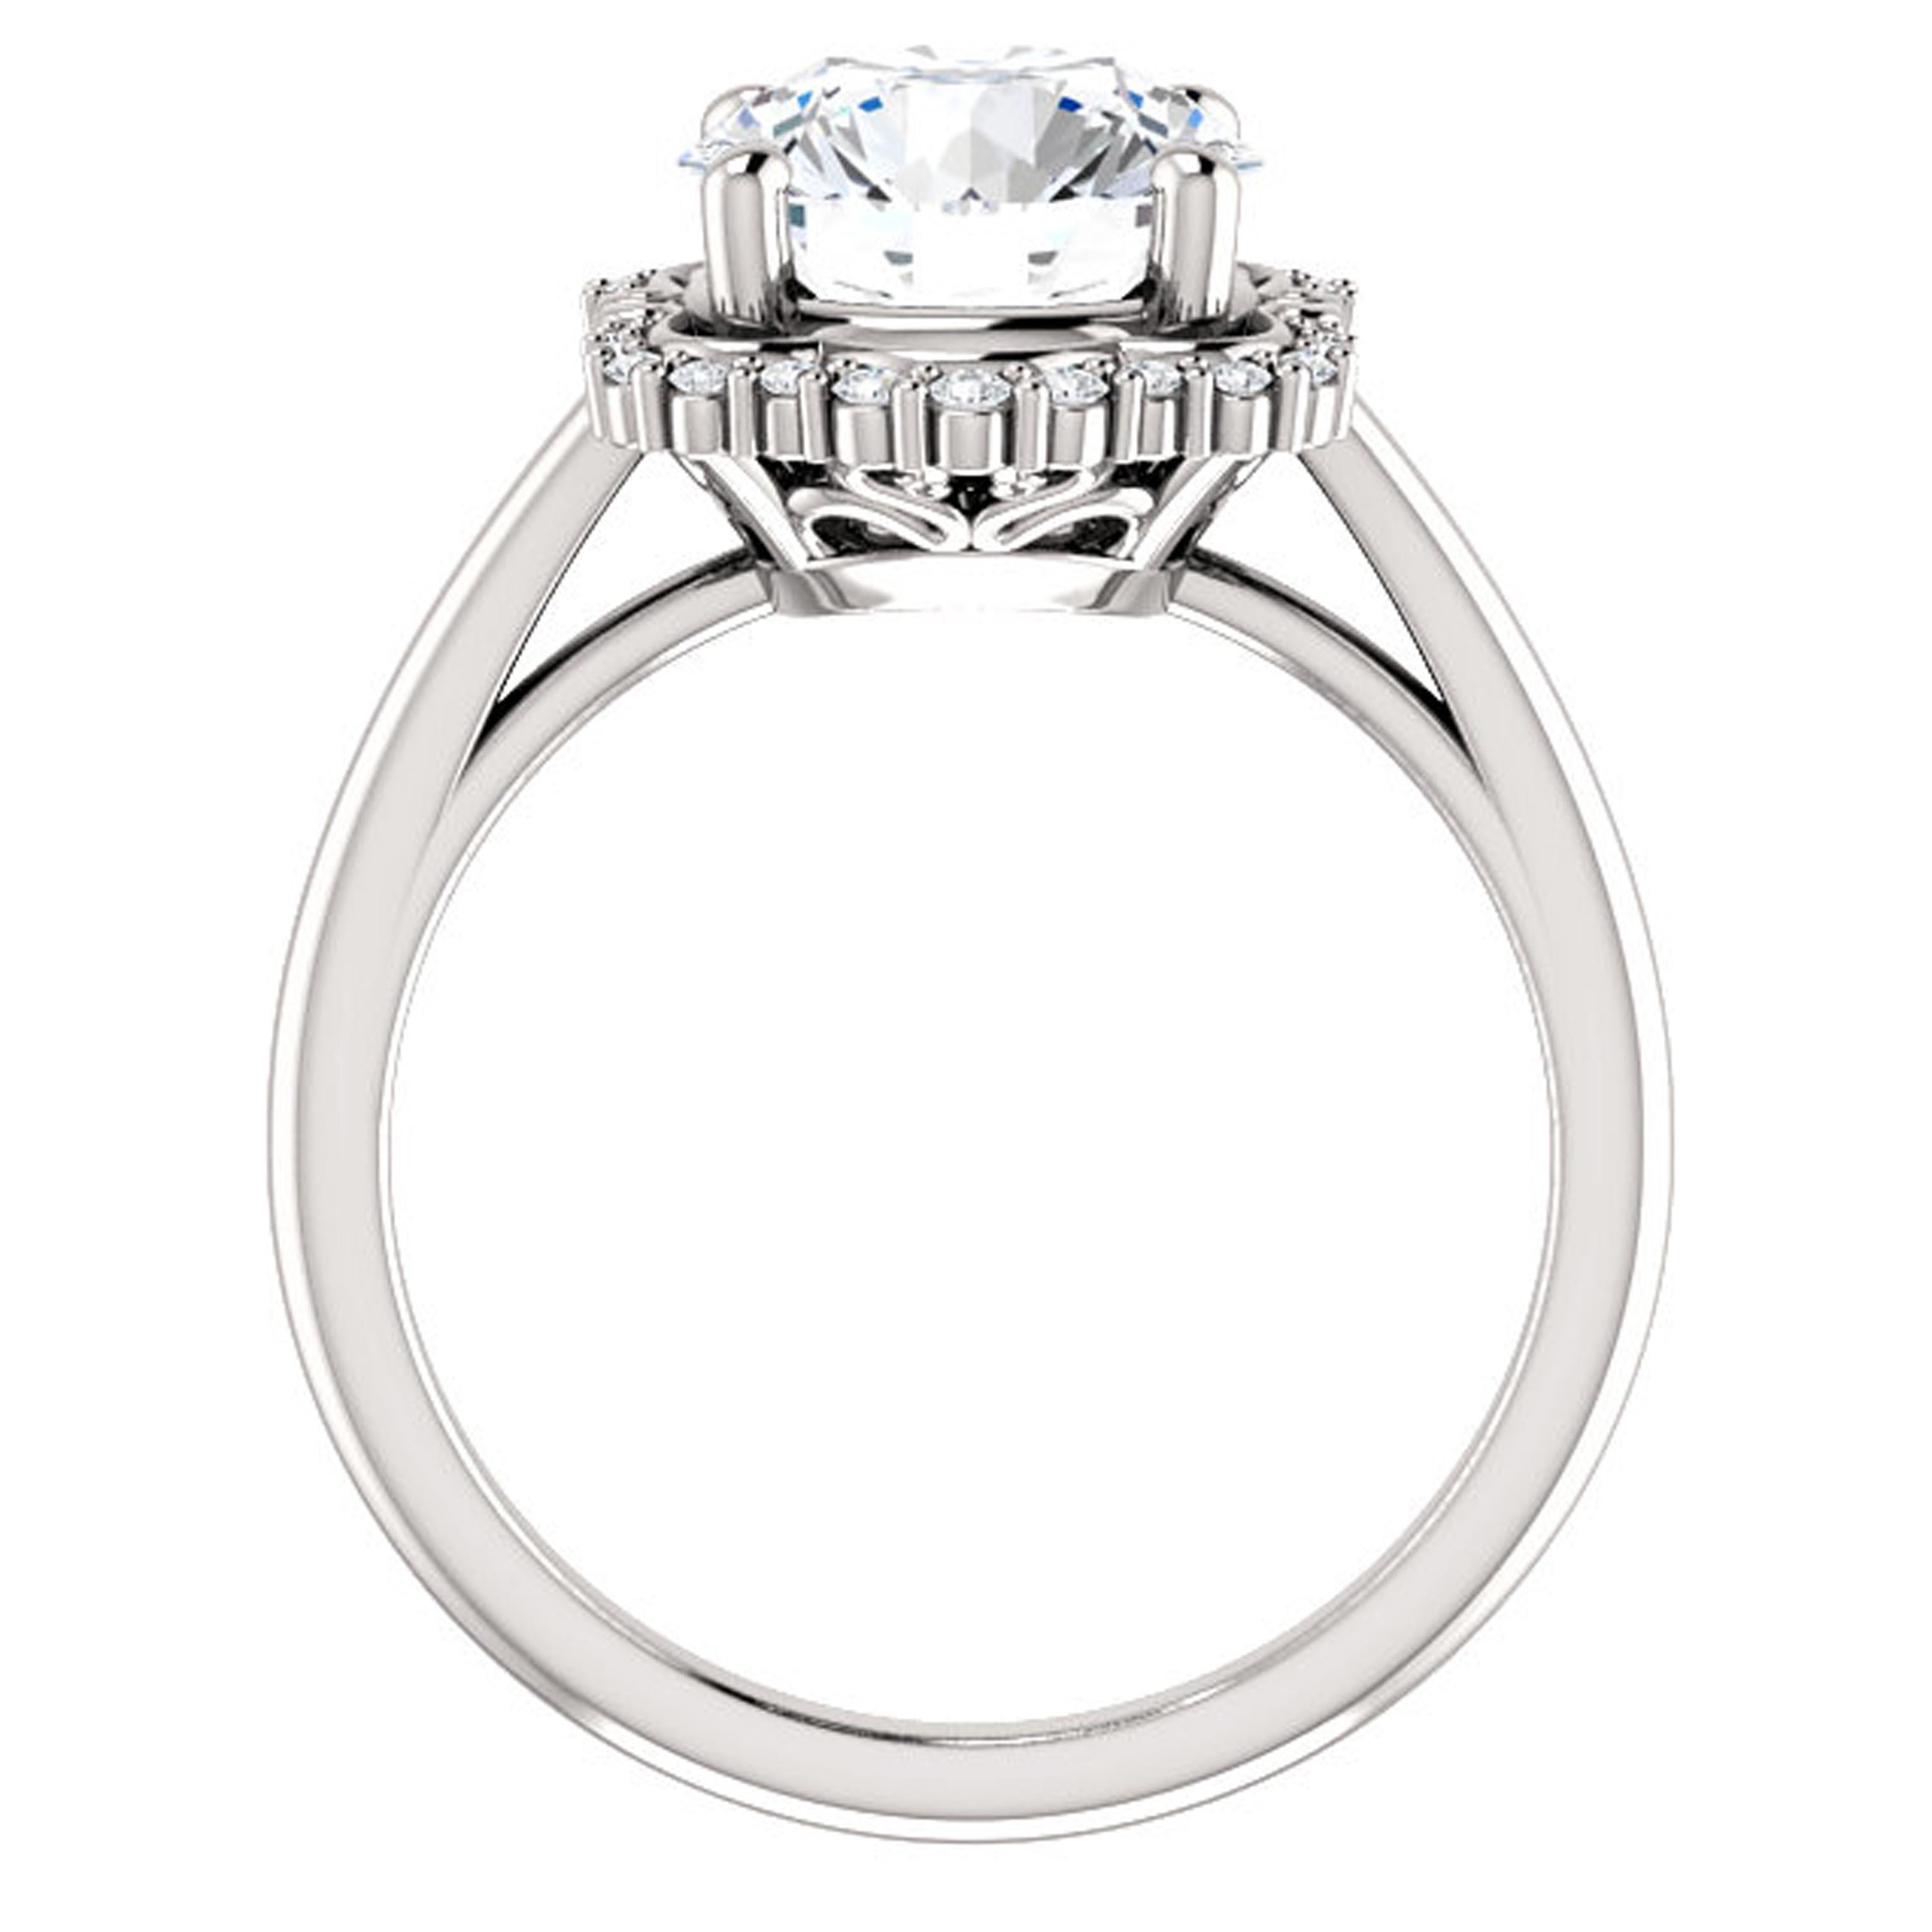 Showcasing a scalloped halo accented with brilliant diamonds, this unique engagement ring features a plain shank. Handcrafted in 14k white gold, this wedding ring shines with luxurious brilliance.

Center Stone:
1 Round Brilliant Natural